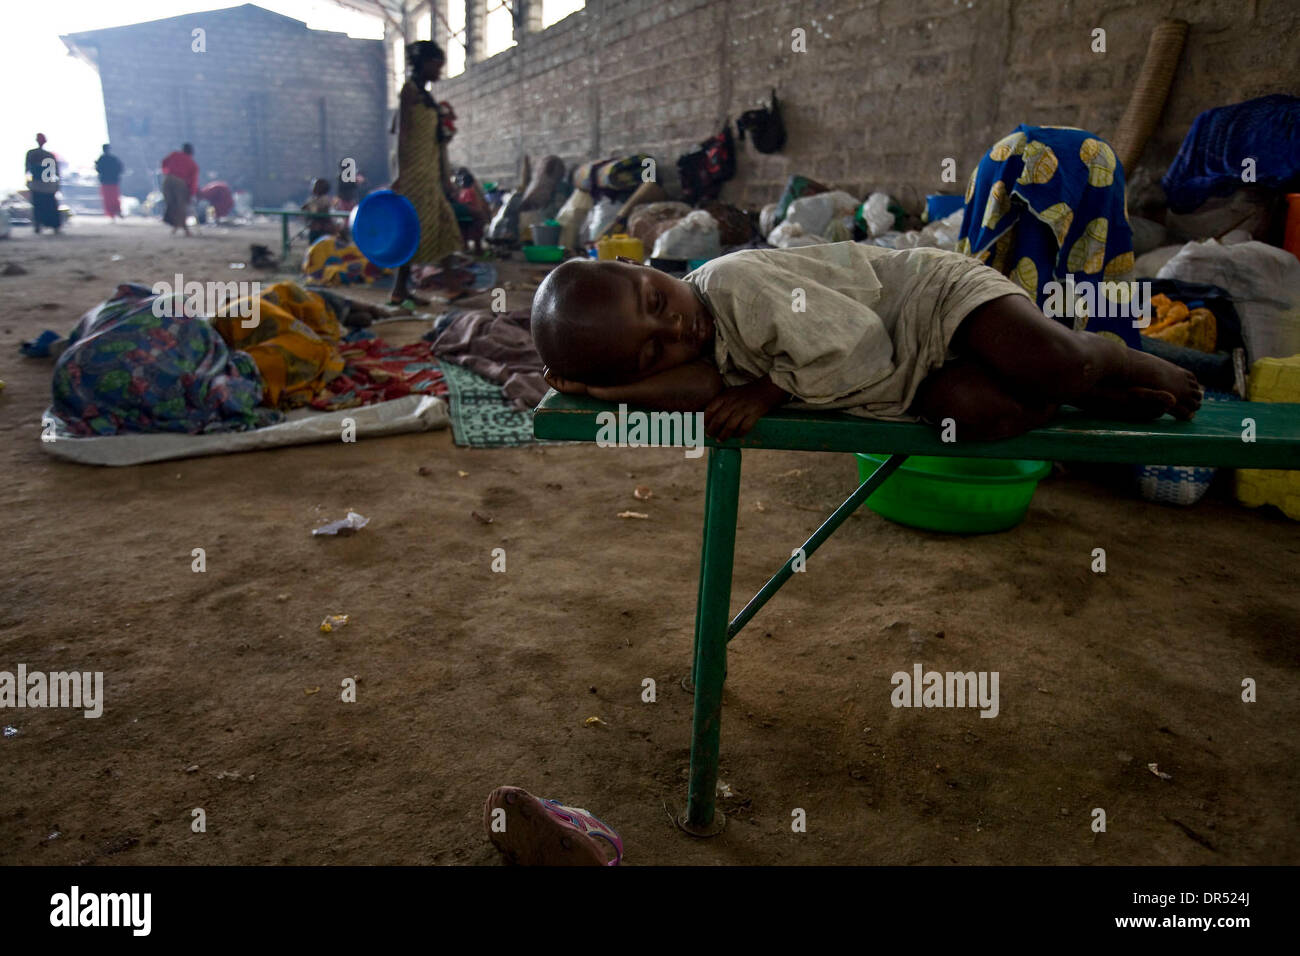 Dec 02, 2008 - Ngangi, Democratic Republic of Congo - A Congolese child sleeps on a bench in an IDP (internally displaced person) camp at the Don Bosco center in Ngangi, north of Goma. refugee (Credit Image: © T.J. Kirkpatrick/ZUMA Press) Stock Photo